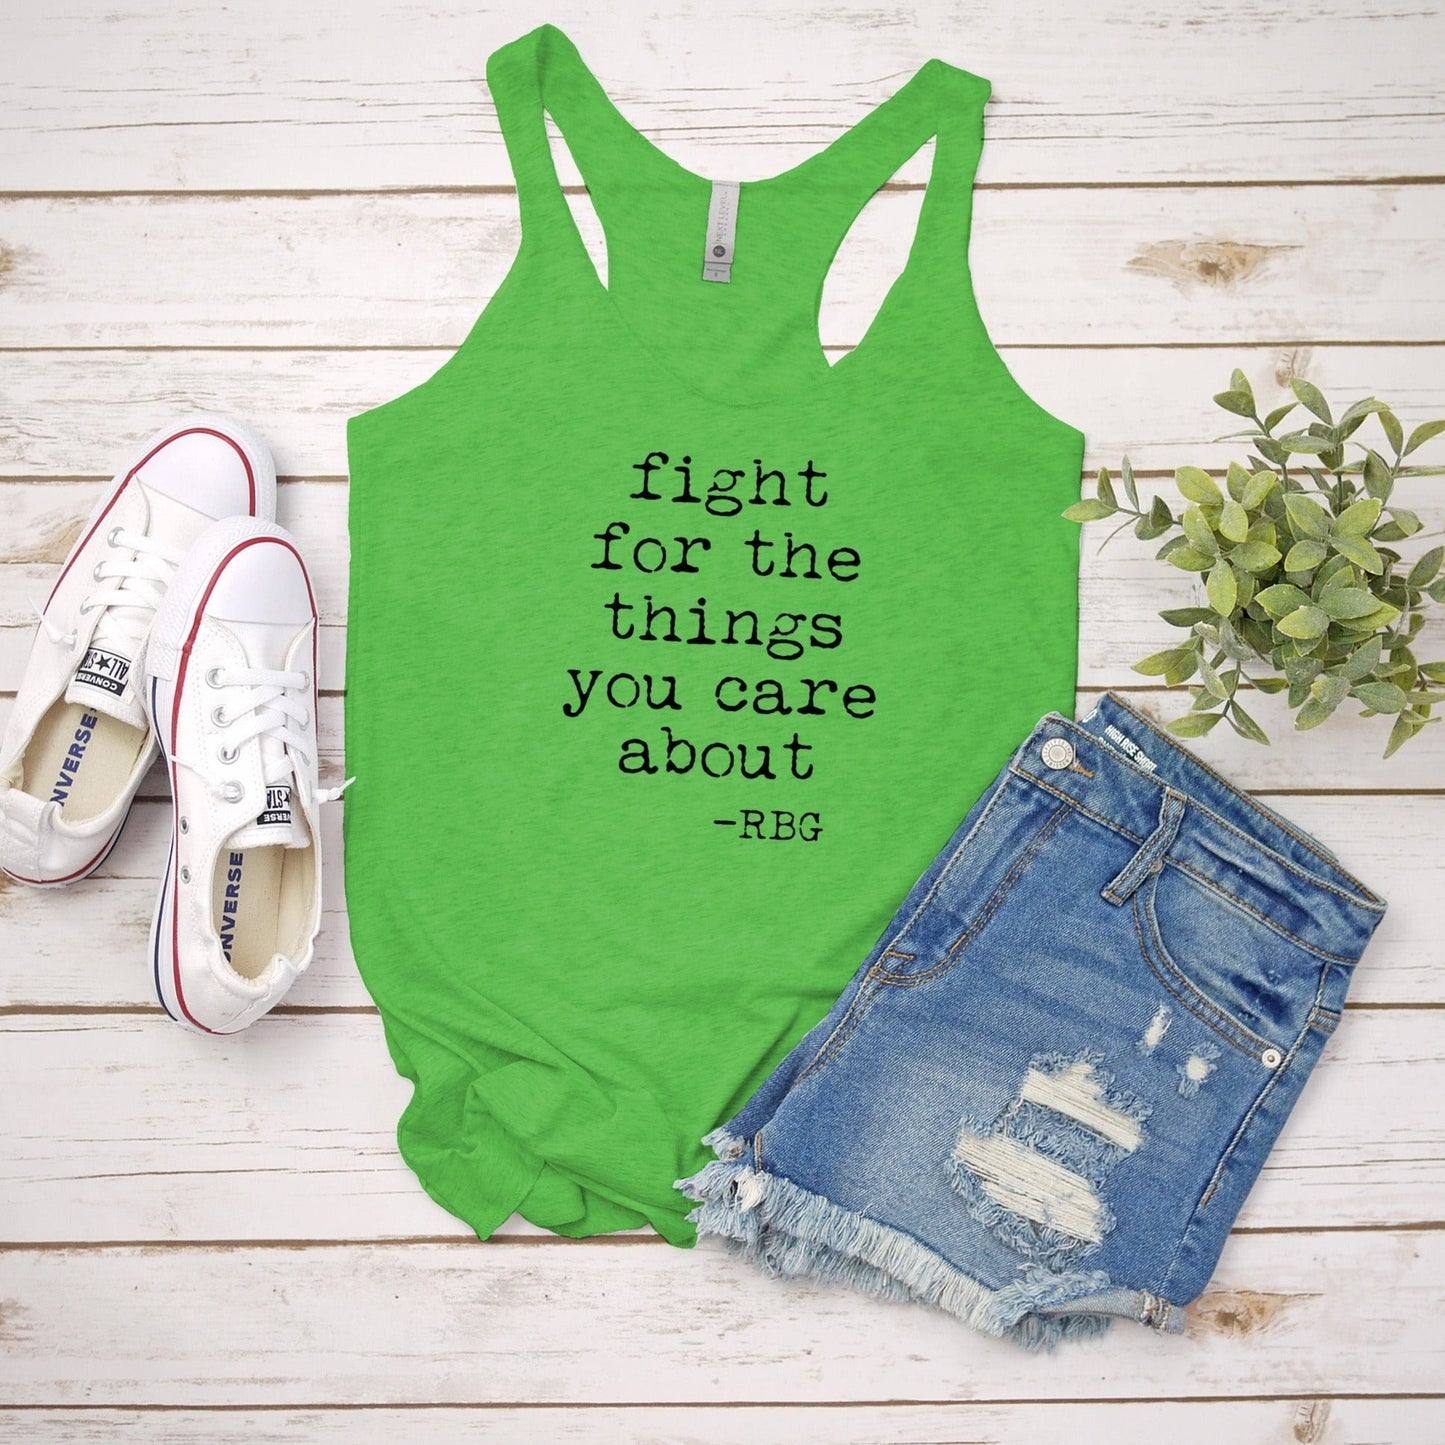 Fight Quote RBG (Ruth Bader Ginsburg) - Women's Tank - Heather Gray, Tahiti, or Envy